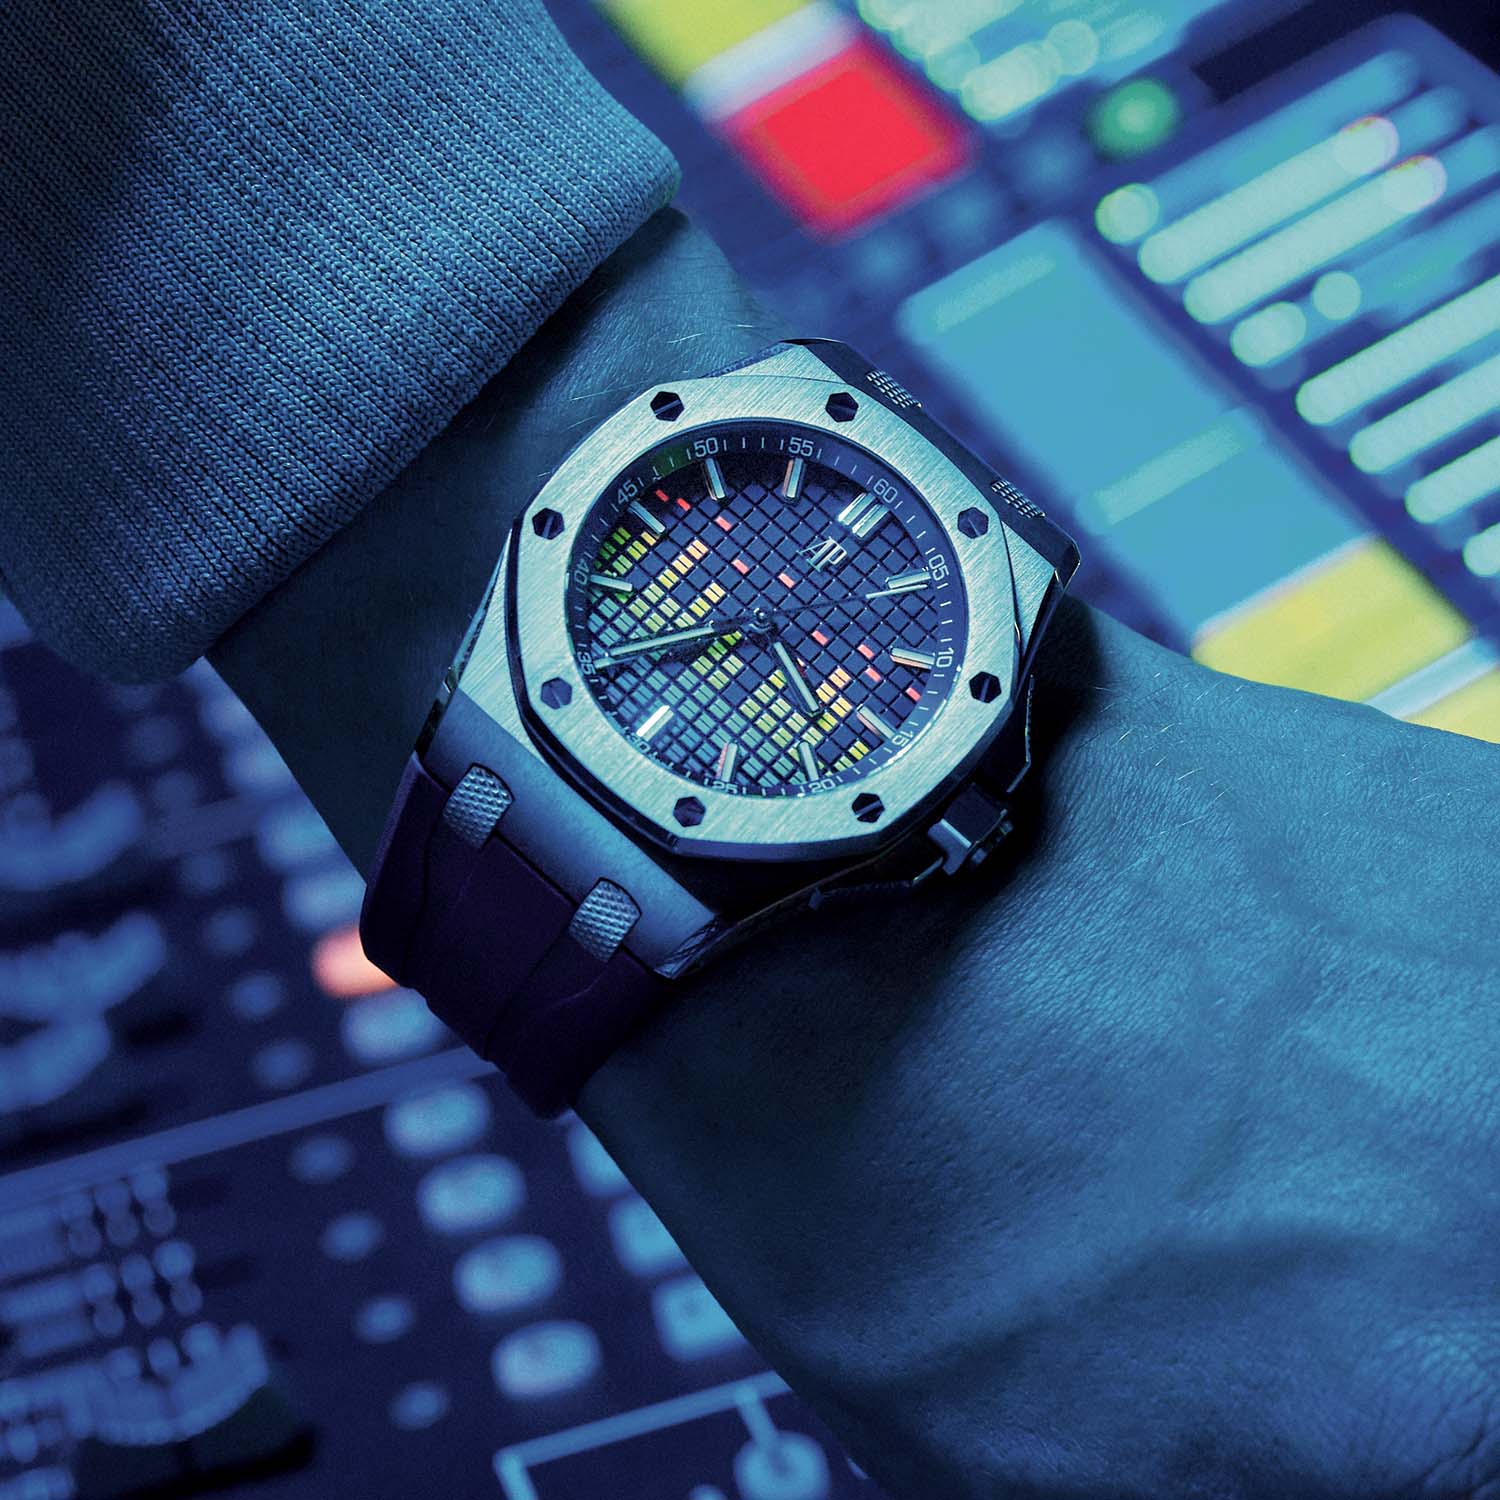 The Royal Oak Offshore pays tribute to the world of music